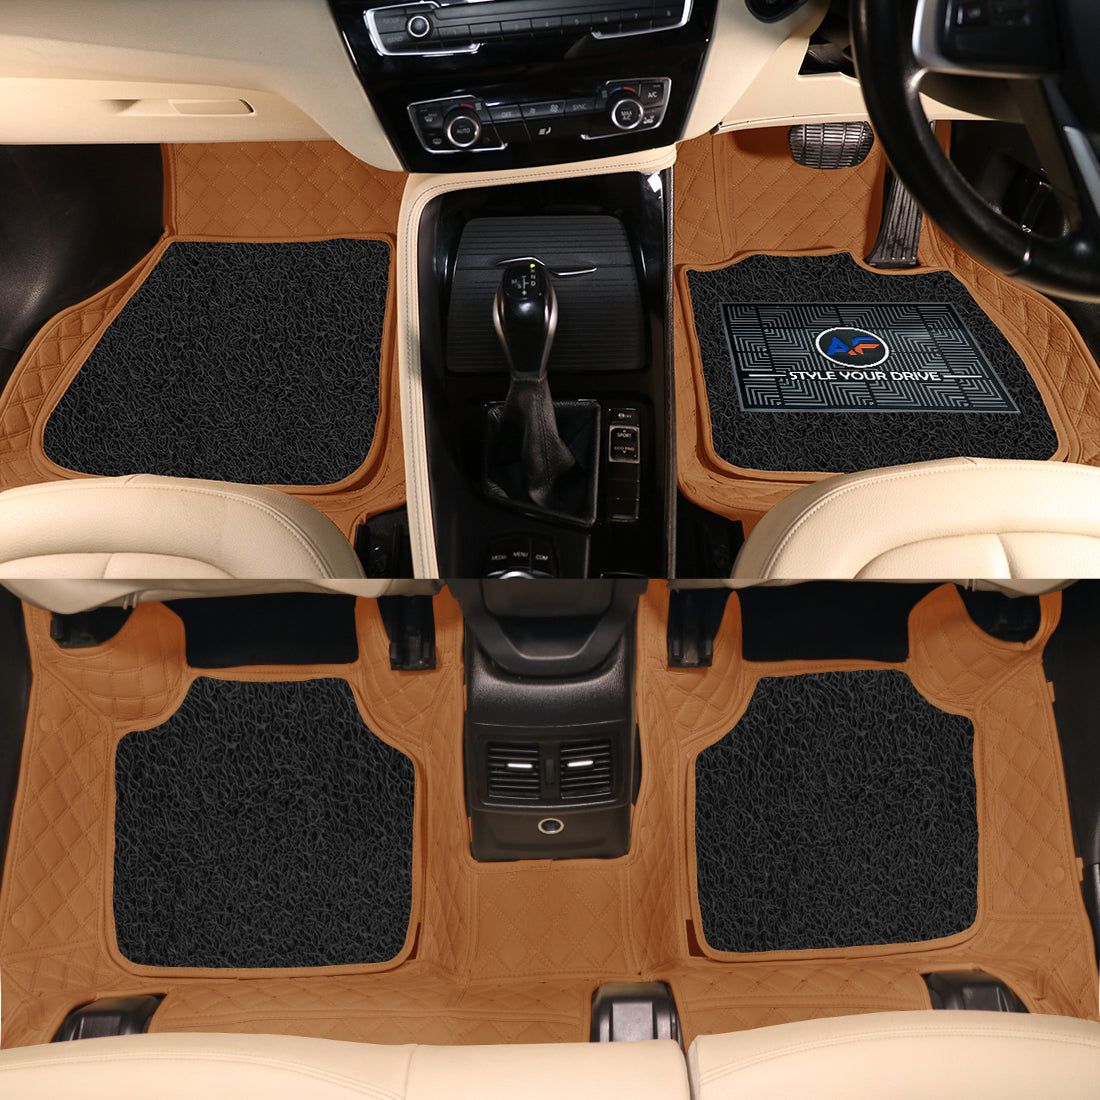 Mahindra Scorpio-2020-7D Luxury Car Mat, All Weather Proof, Anti-Skid, 100% Waterproof & Odorless with Unique Diamond Fish Design (24mm Luxury PU Leather, 2 Rows)